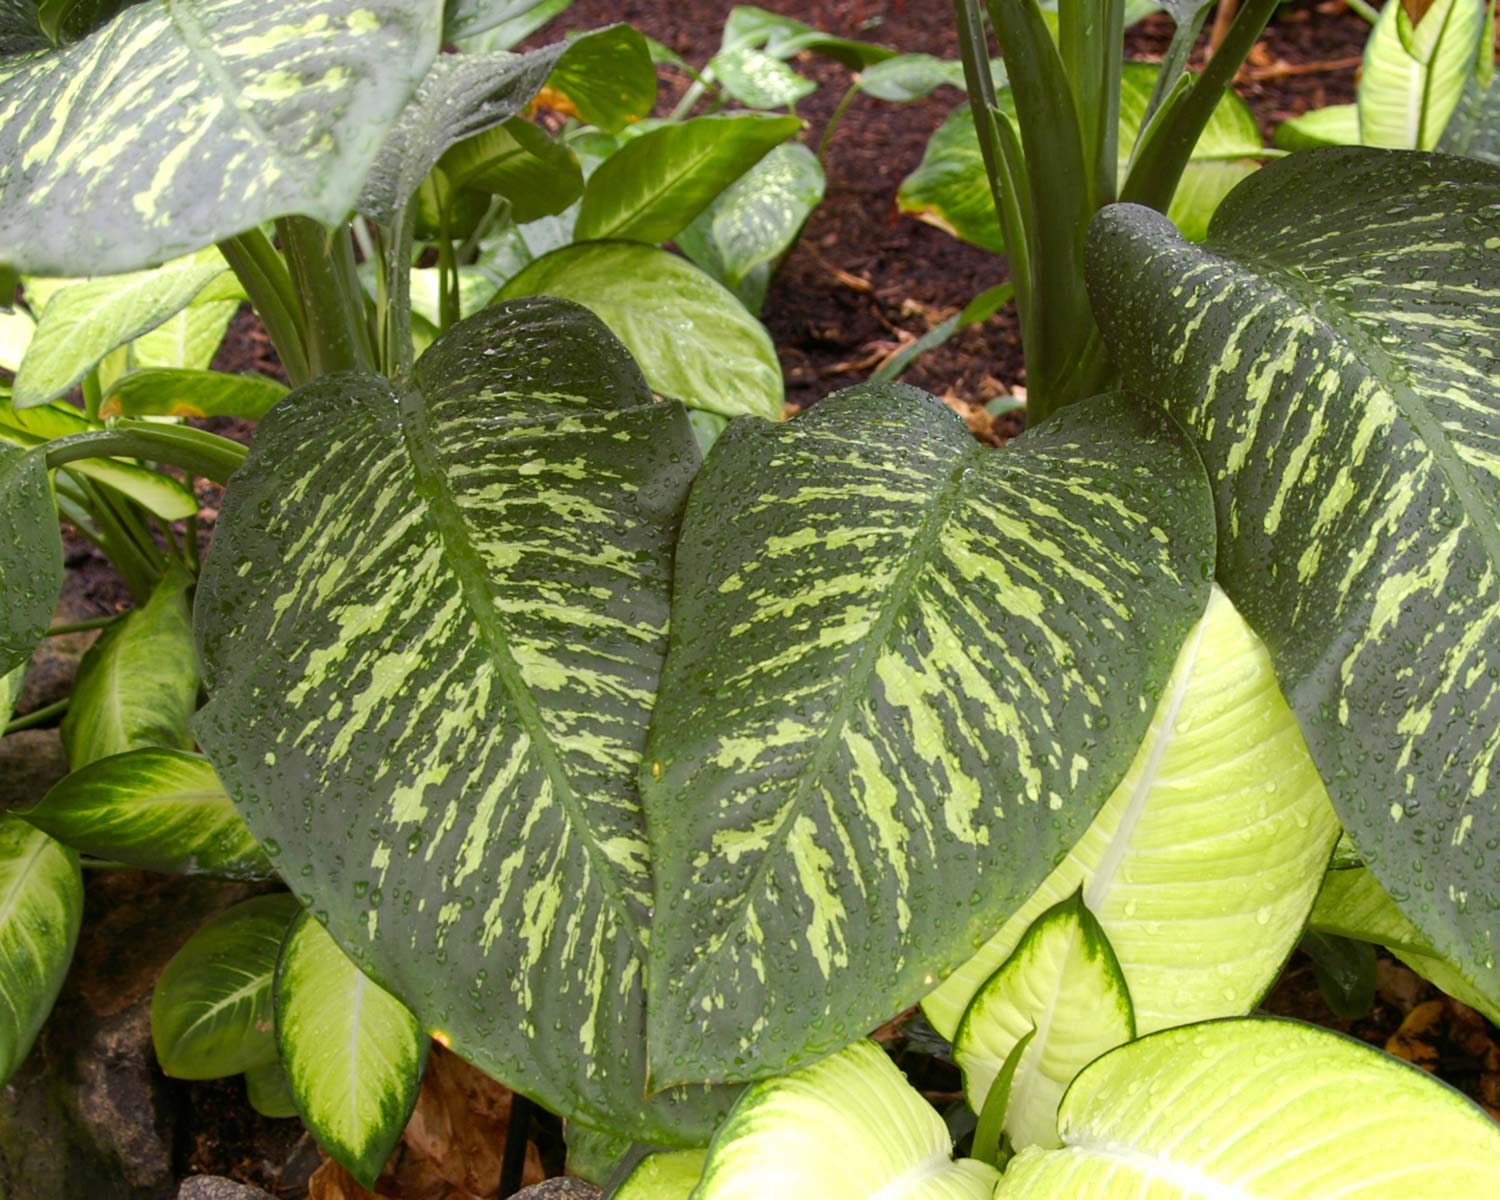 Dieffenbachia seguine cultivars - large paddle shaped leaves green with cream markings